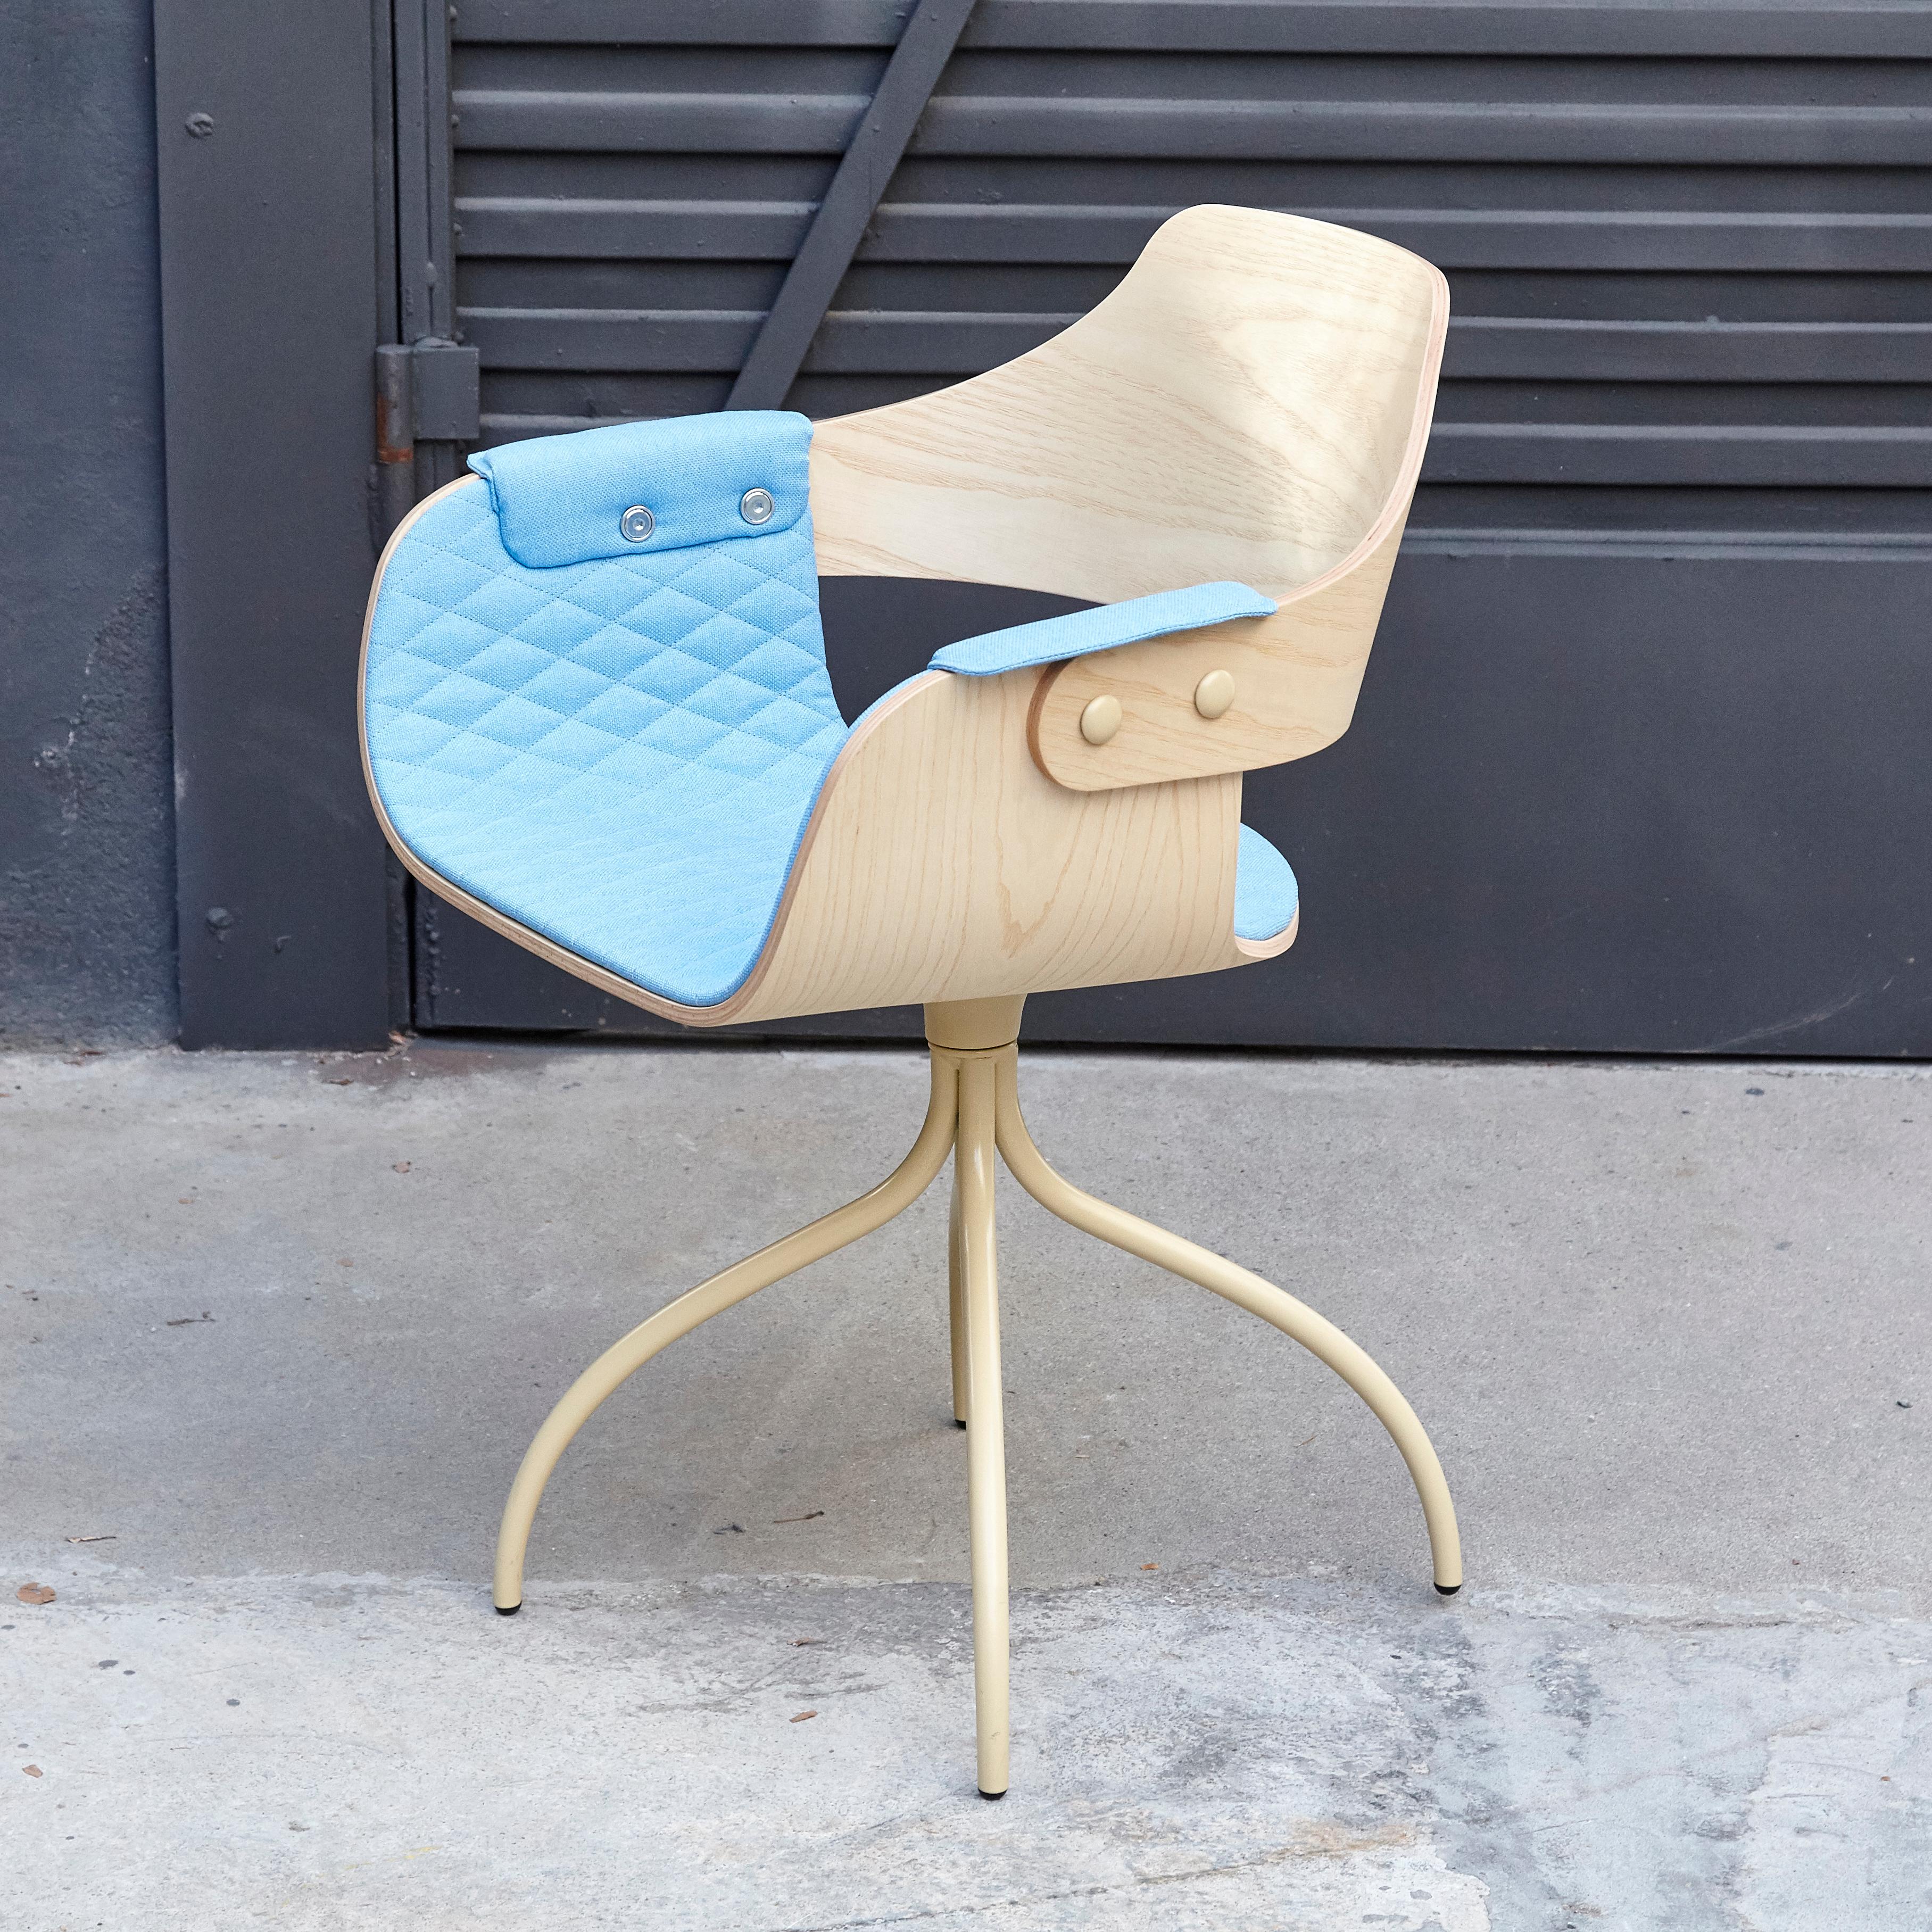 Steel Jaime Hayon, Contemporary Upholstered Blue Wood Chair Showtime by BD Barcelona